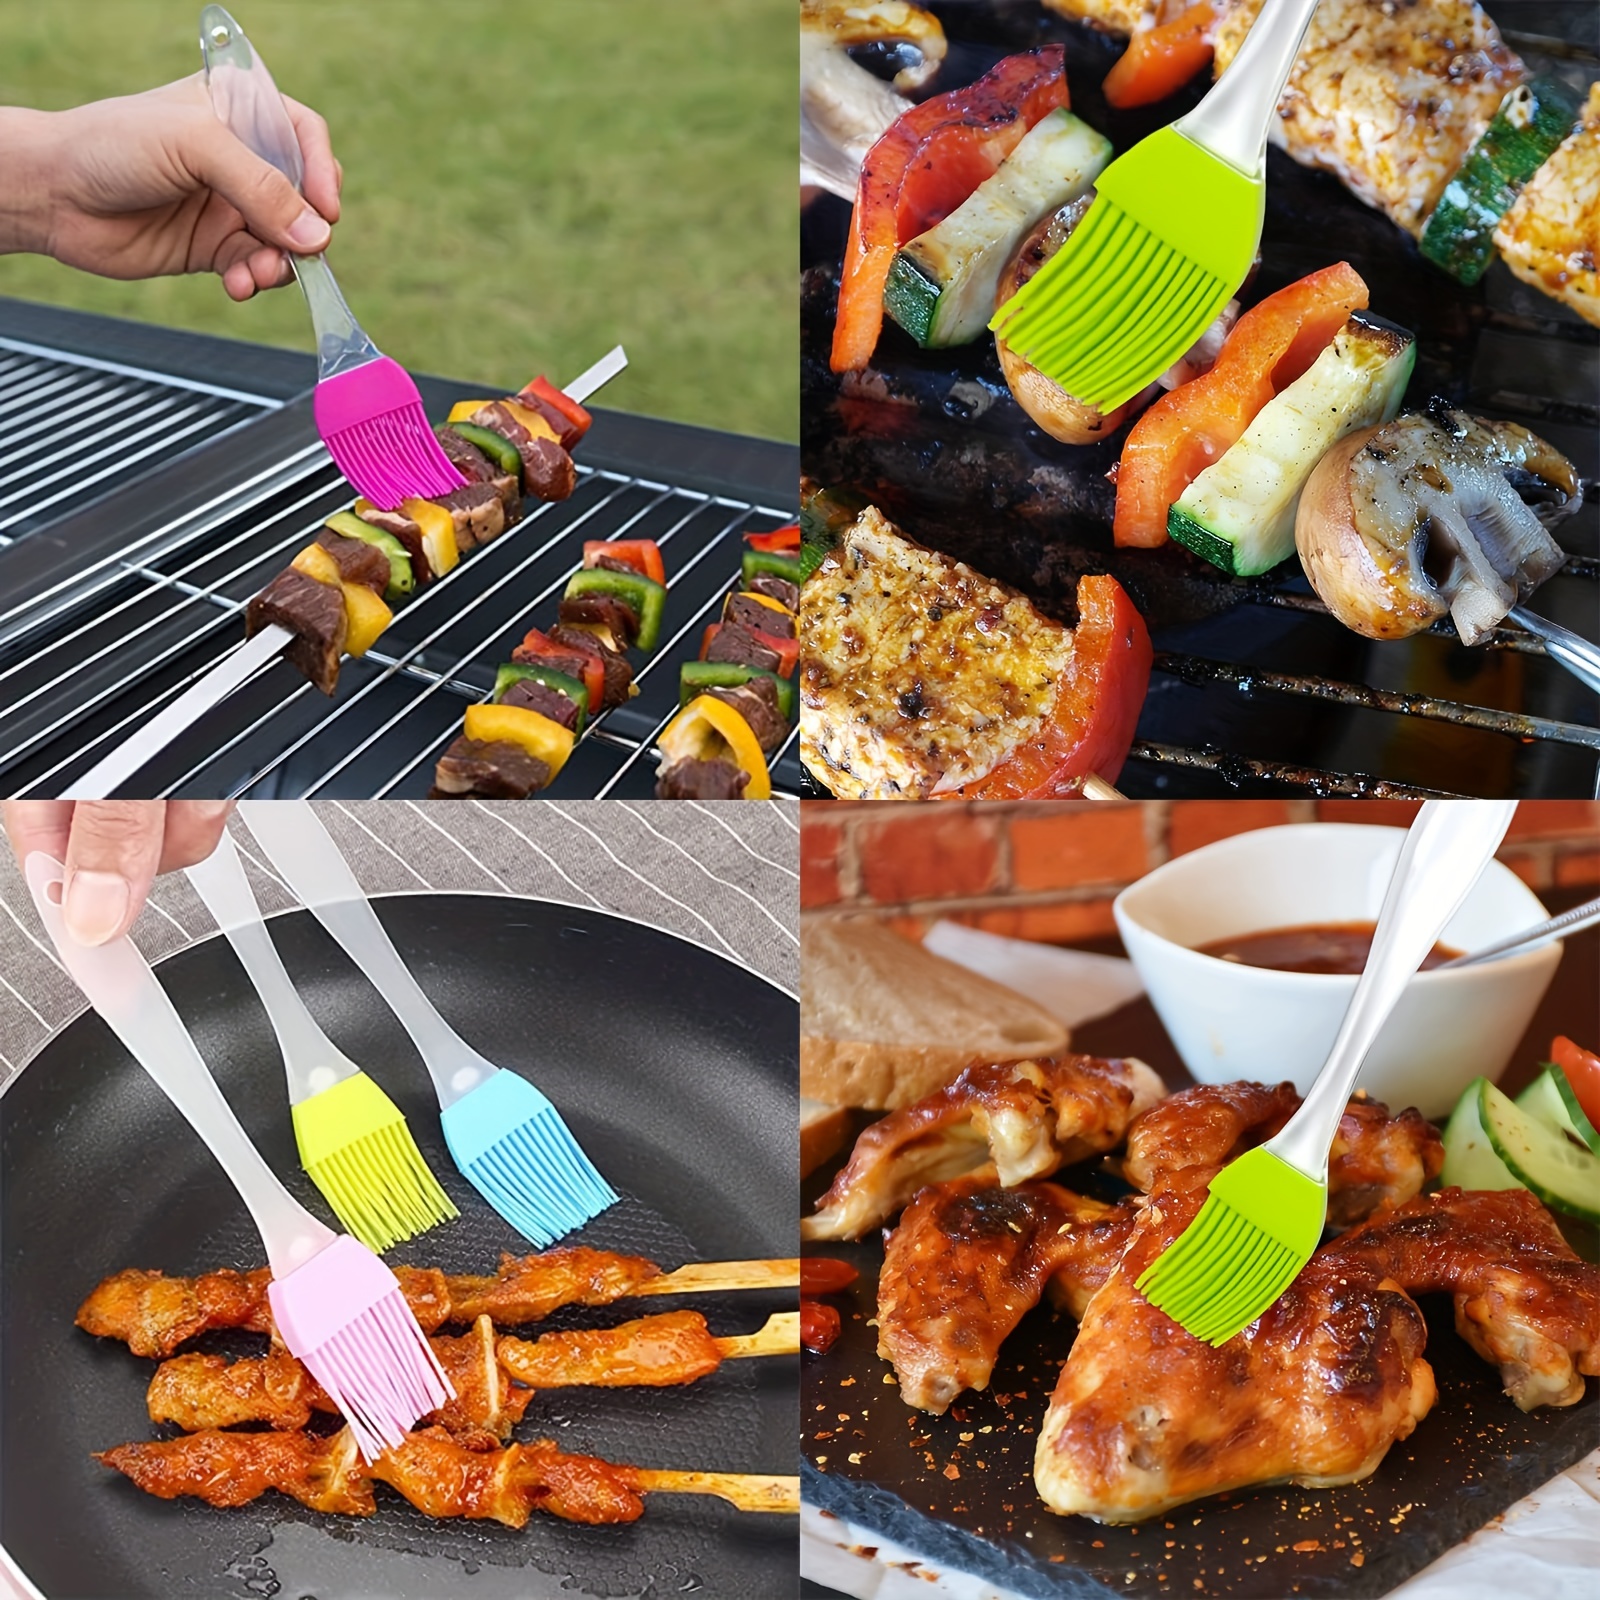 1PC Silicone Barbeque Brush Cooking BBQ Heat Resistant Oil Brushes